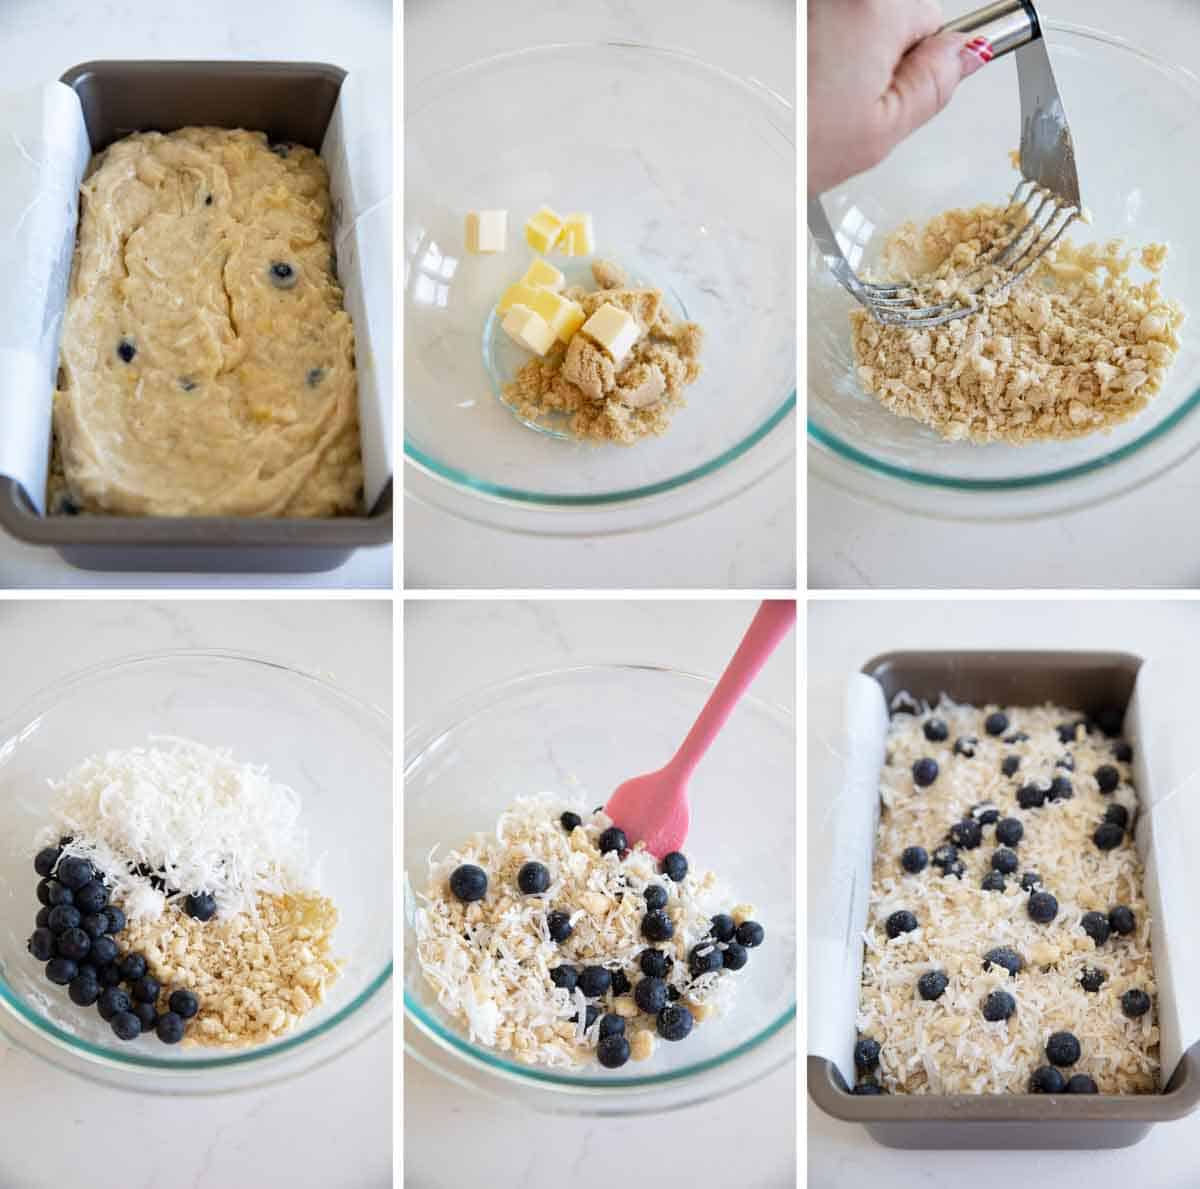 Photos showing steps to make streusel topping for blueberry banana bread.